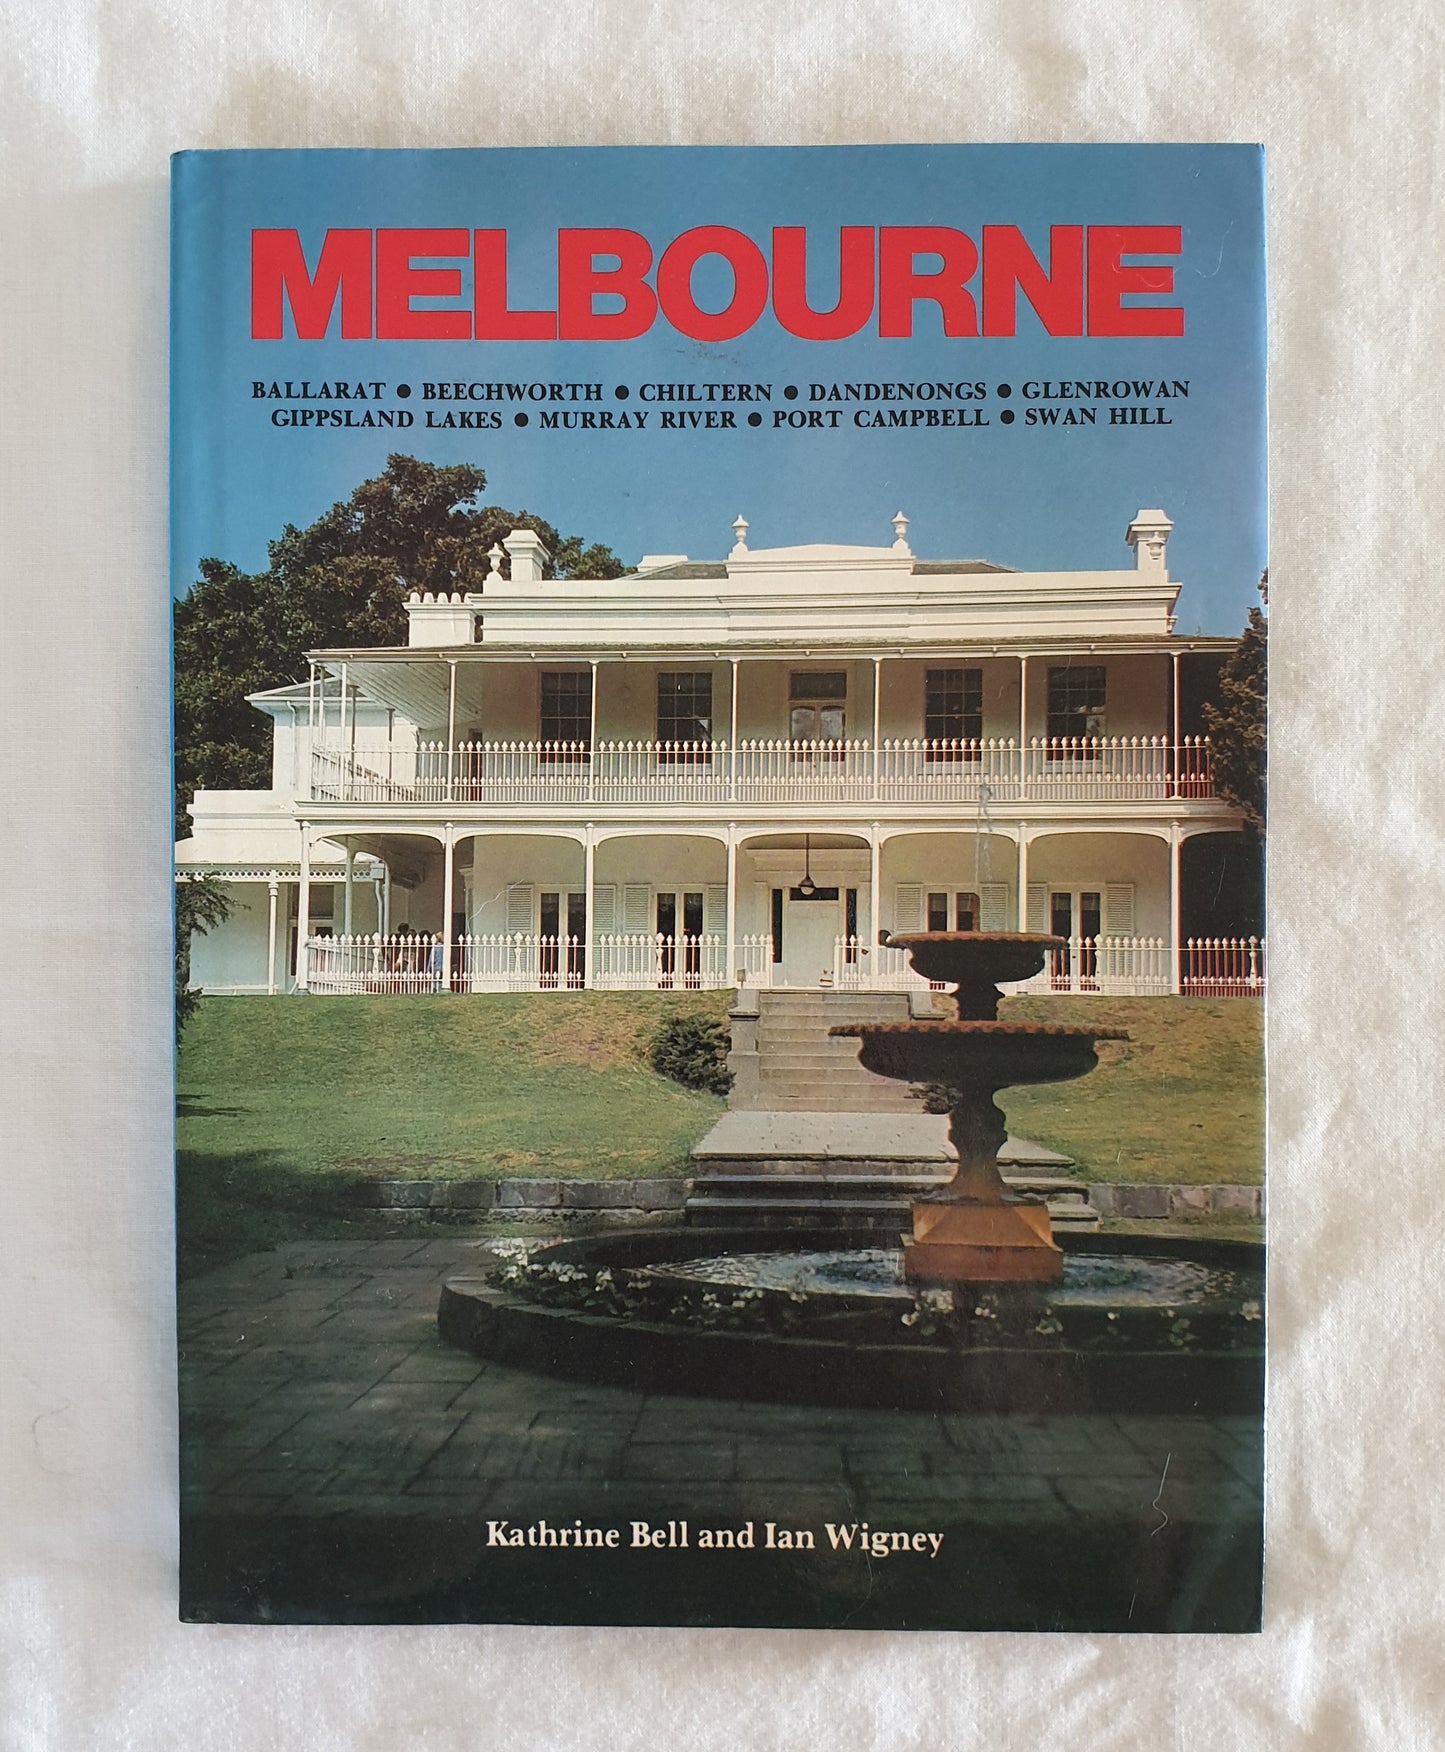 Melbourne by Katherine Bell and Ian Wigney